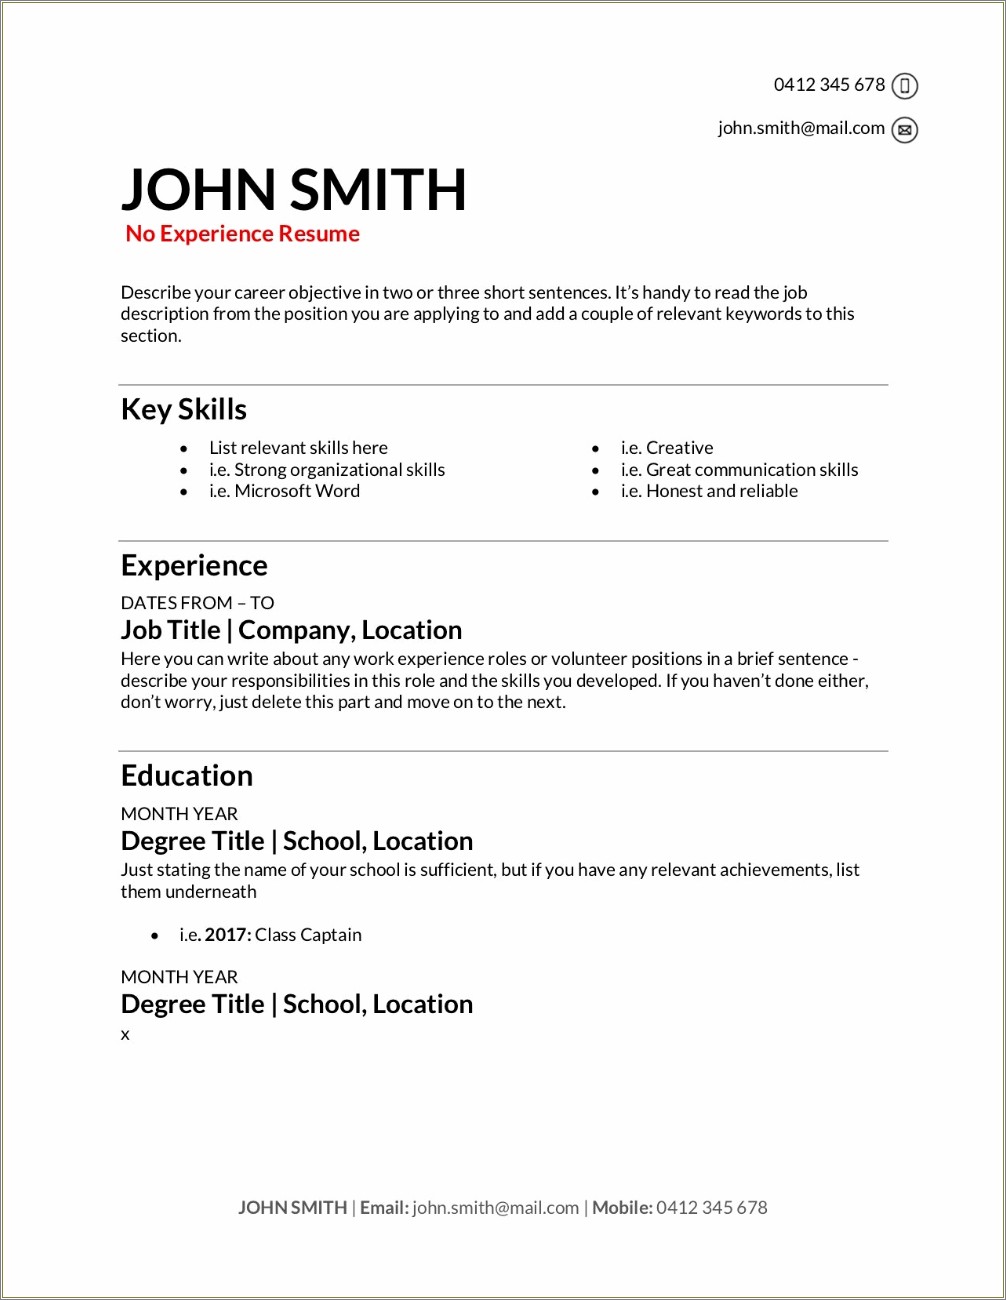 Resume With Experience But Little Education